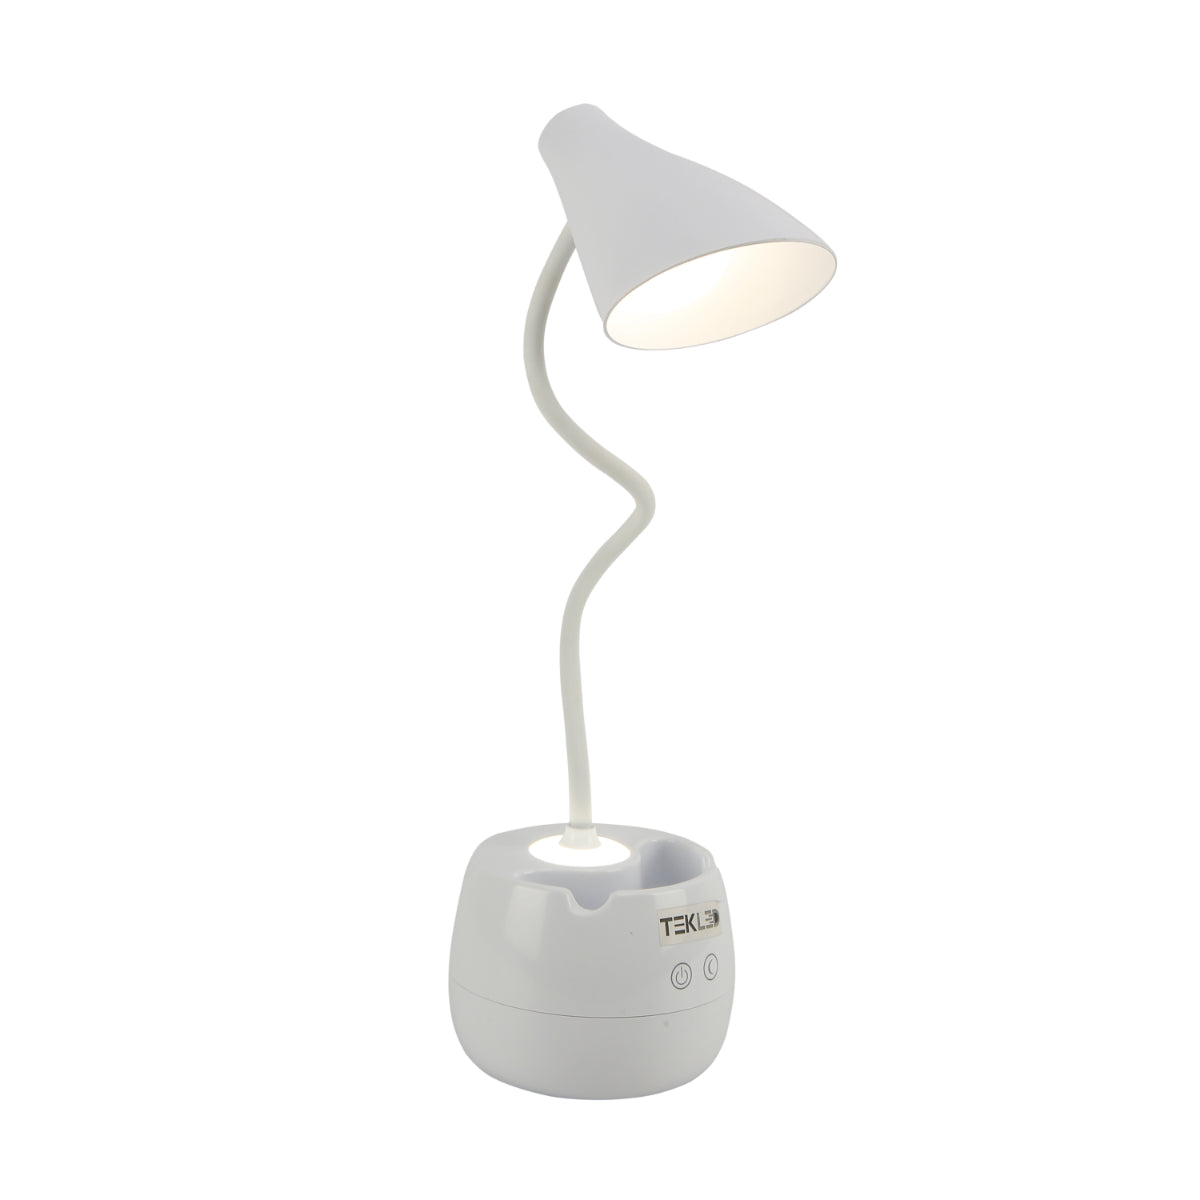 Main image of Rechargeable Gooseneck Desk Lamp with Cone Head and Pencil Holder 130-03761